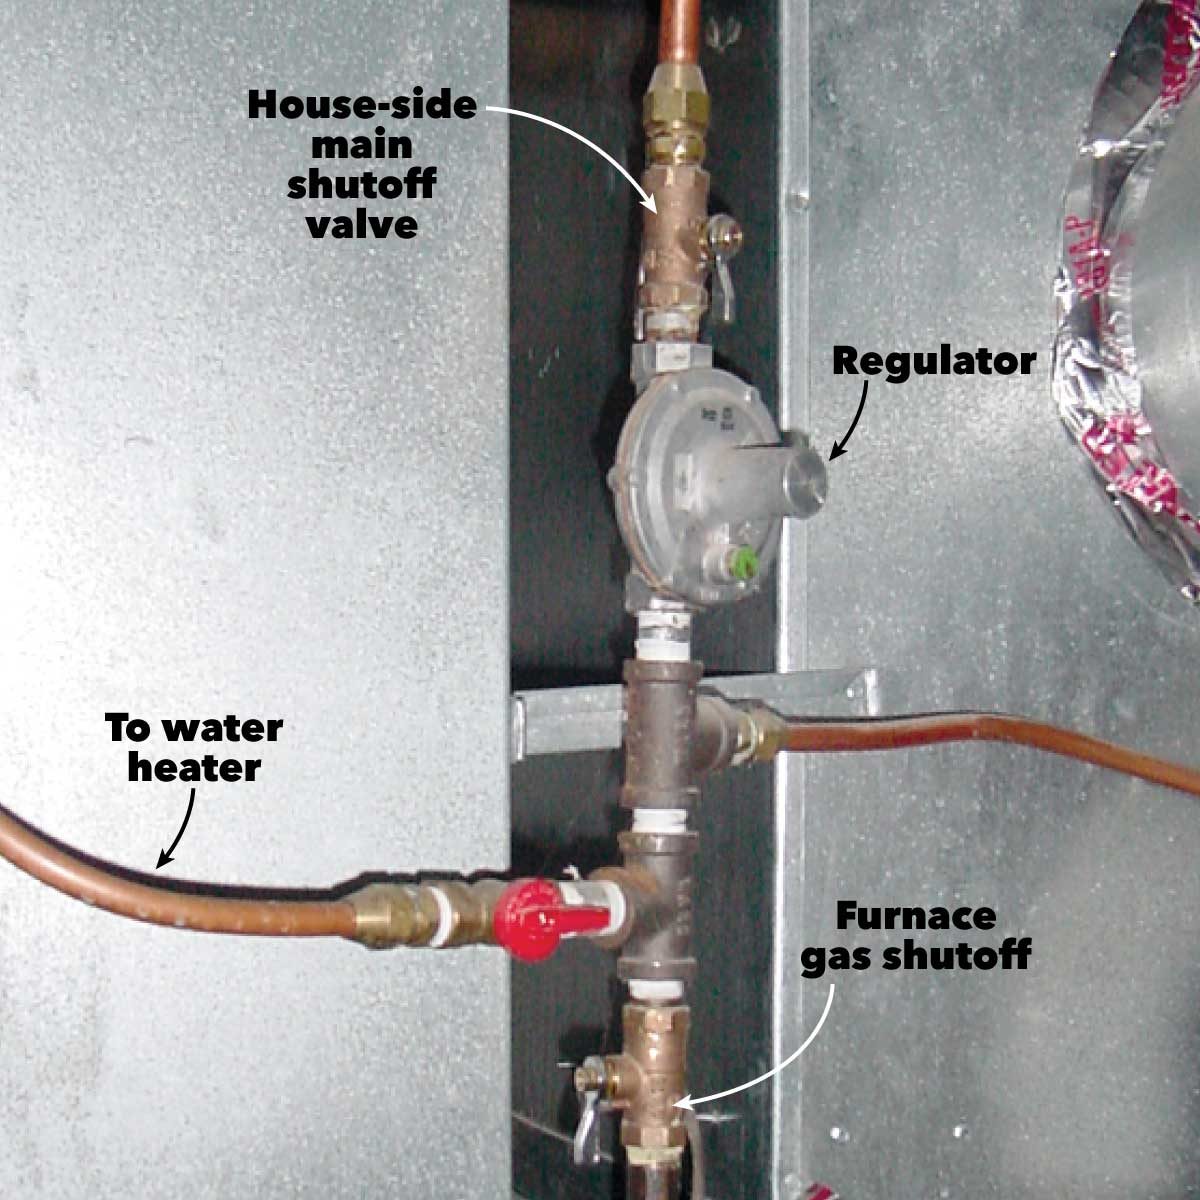 How To Locate Your Gas Shutoff Valve And Water Shutoff Valve